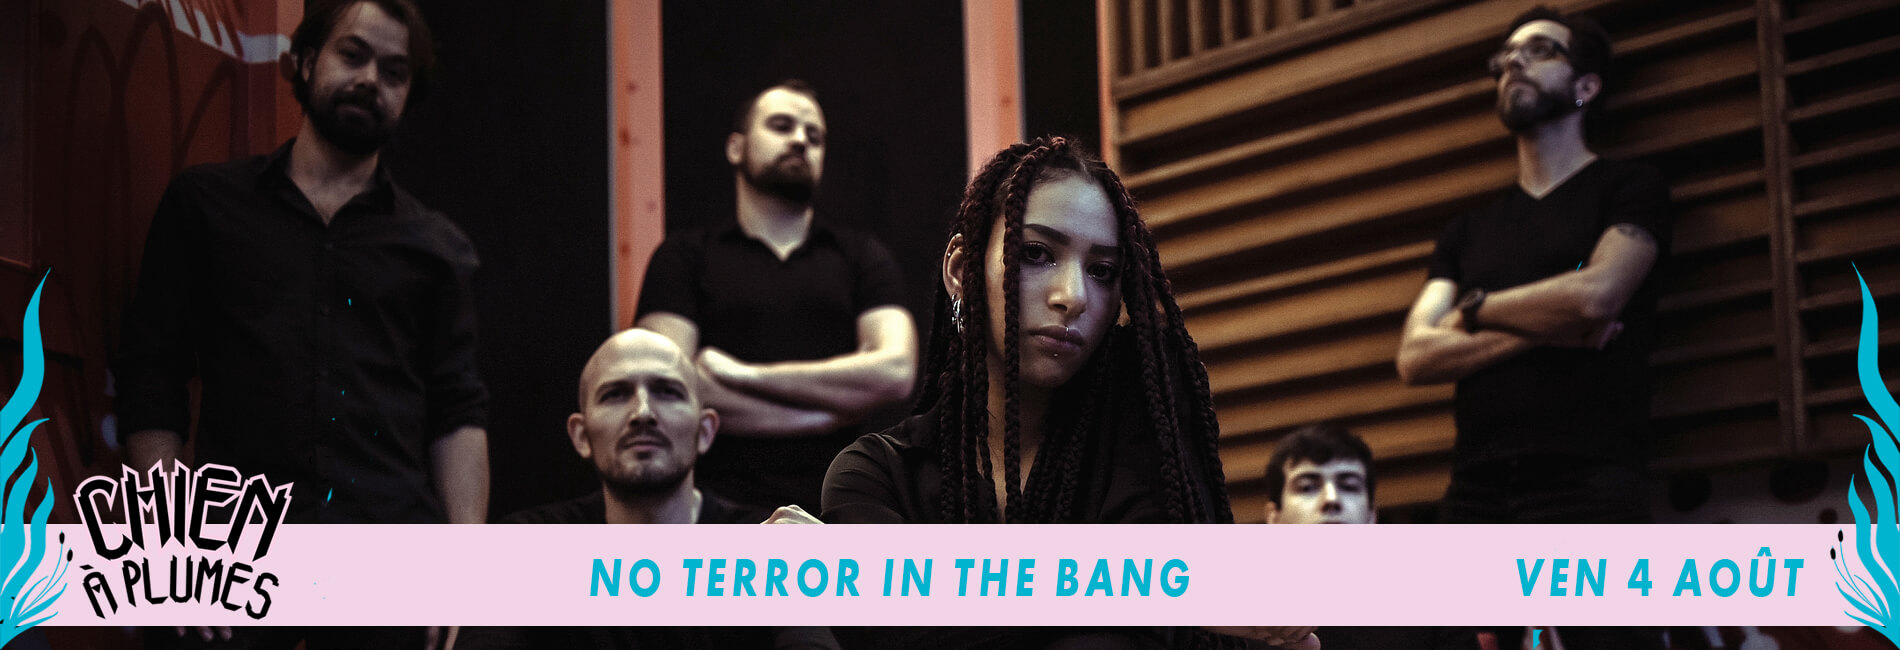 NO TERROR IN THE BANG_CHIENAPLUMES